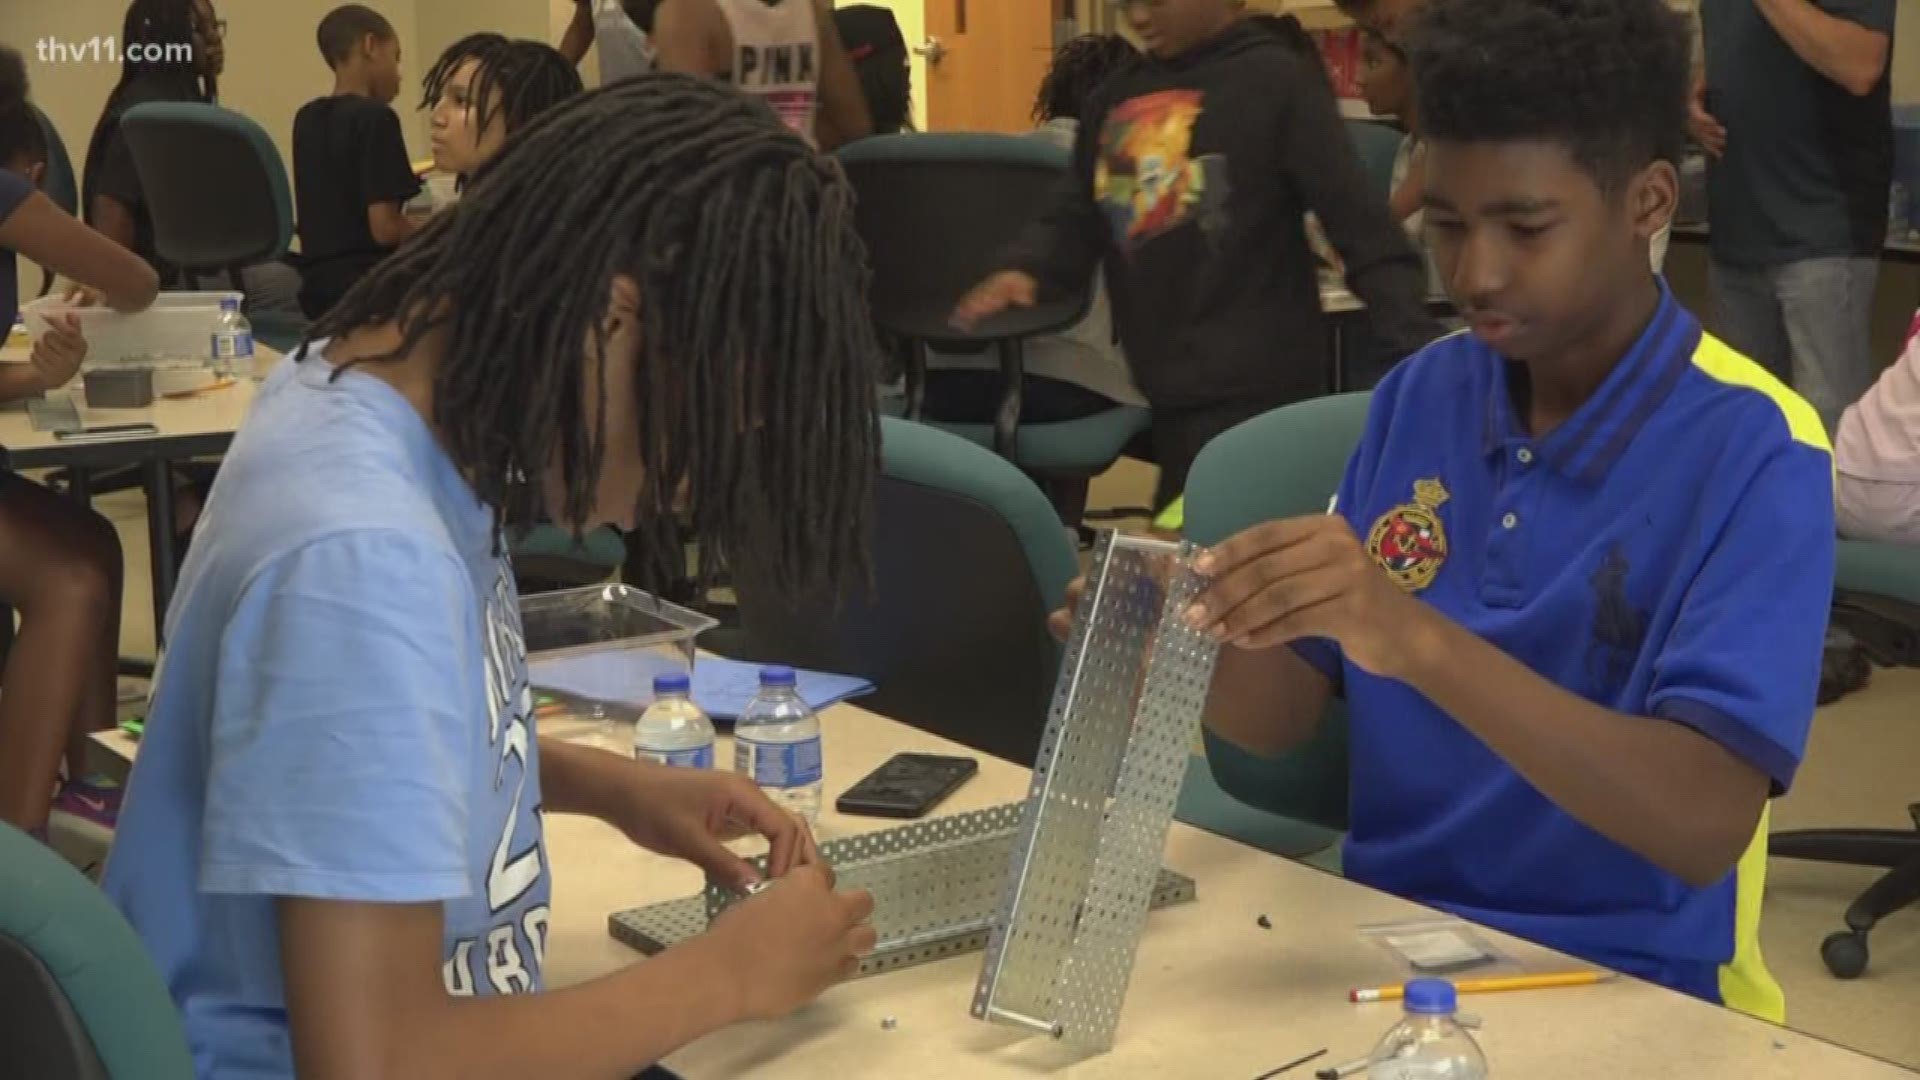 The goal is to help minority students learn about careers in STEM.